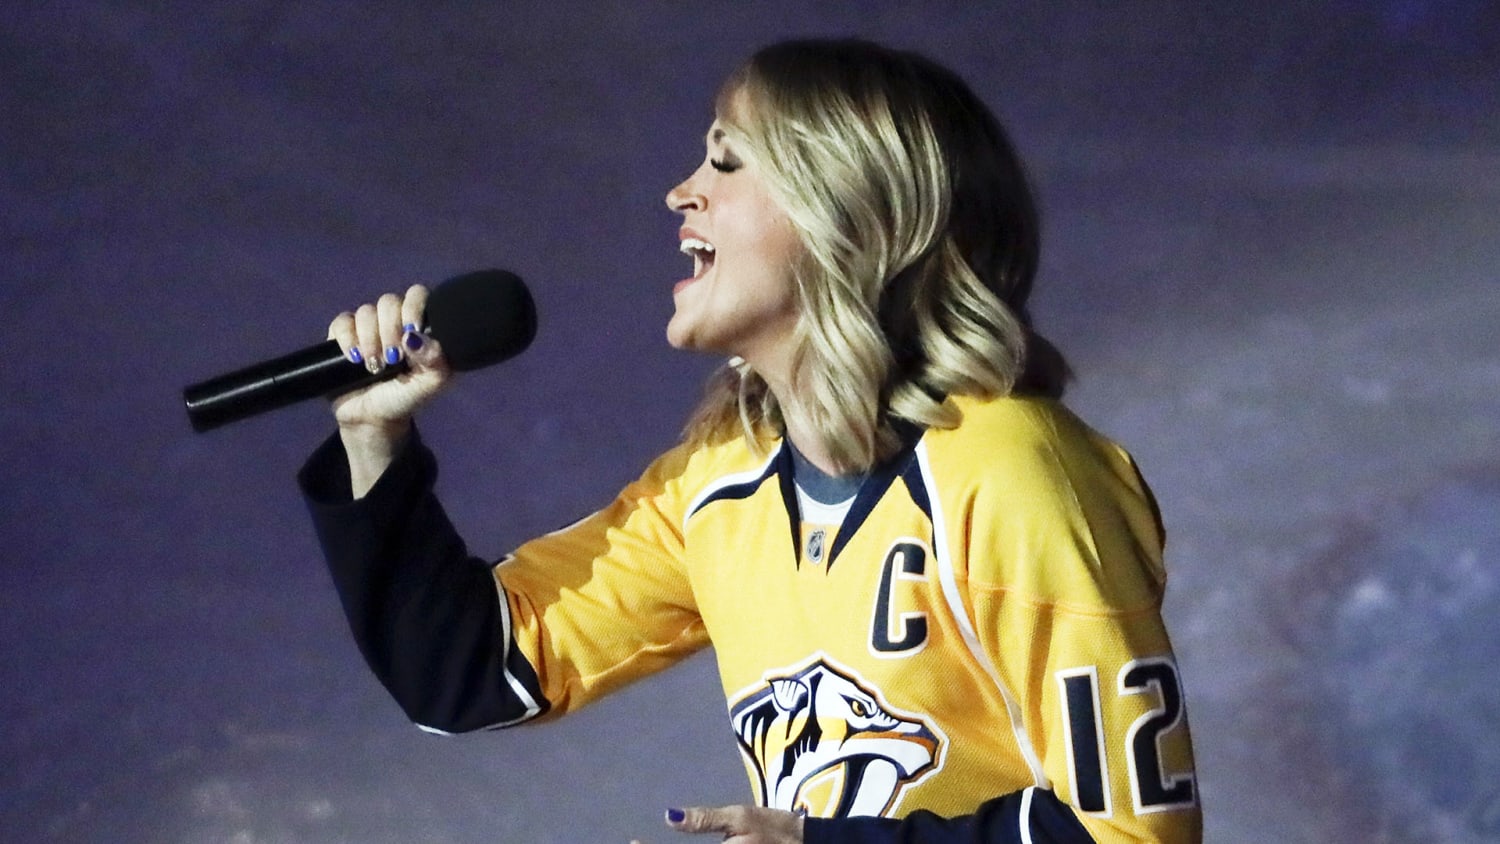 Carrie Underwood Surprises Mike Fisher by Singing the National